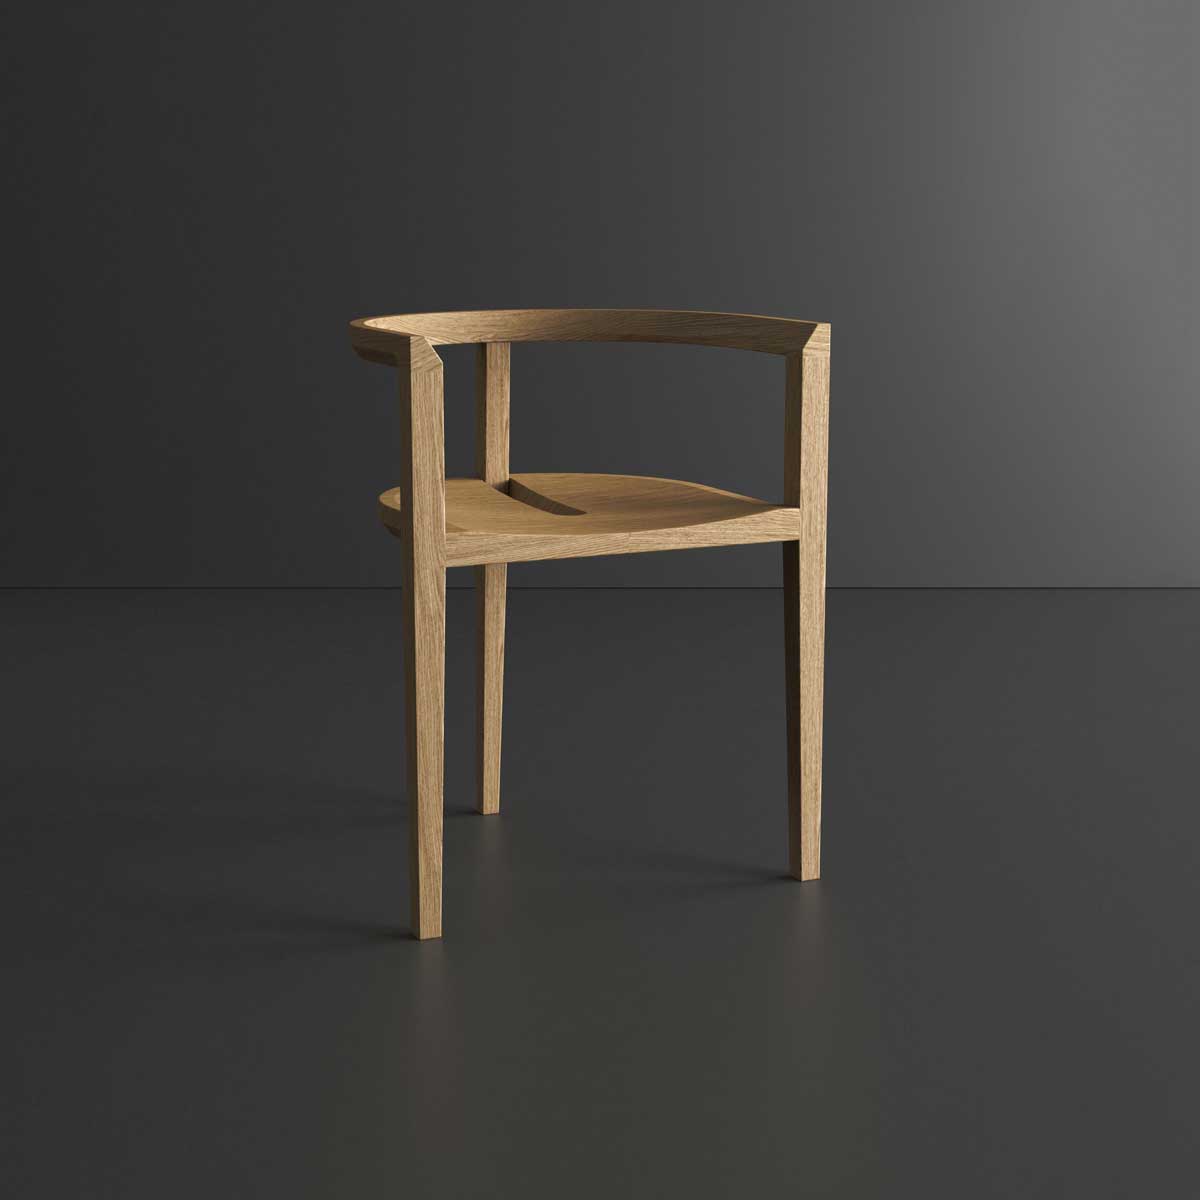 Solid Hardwood stacking chair in oak